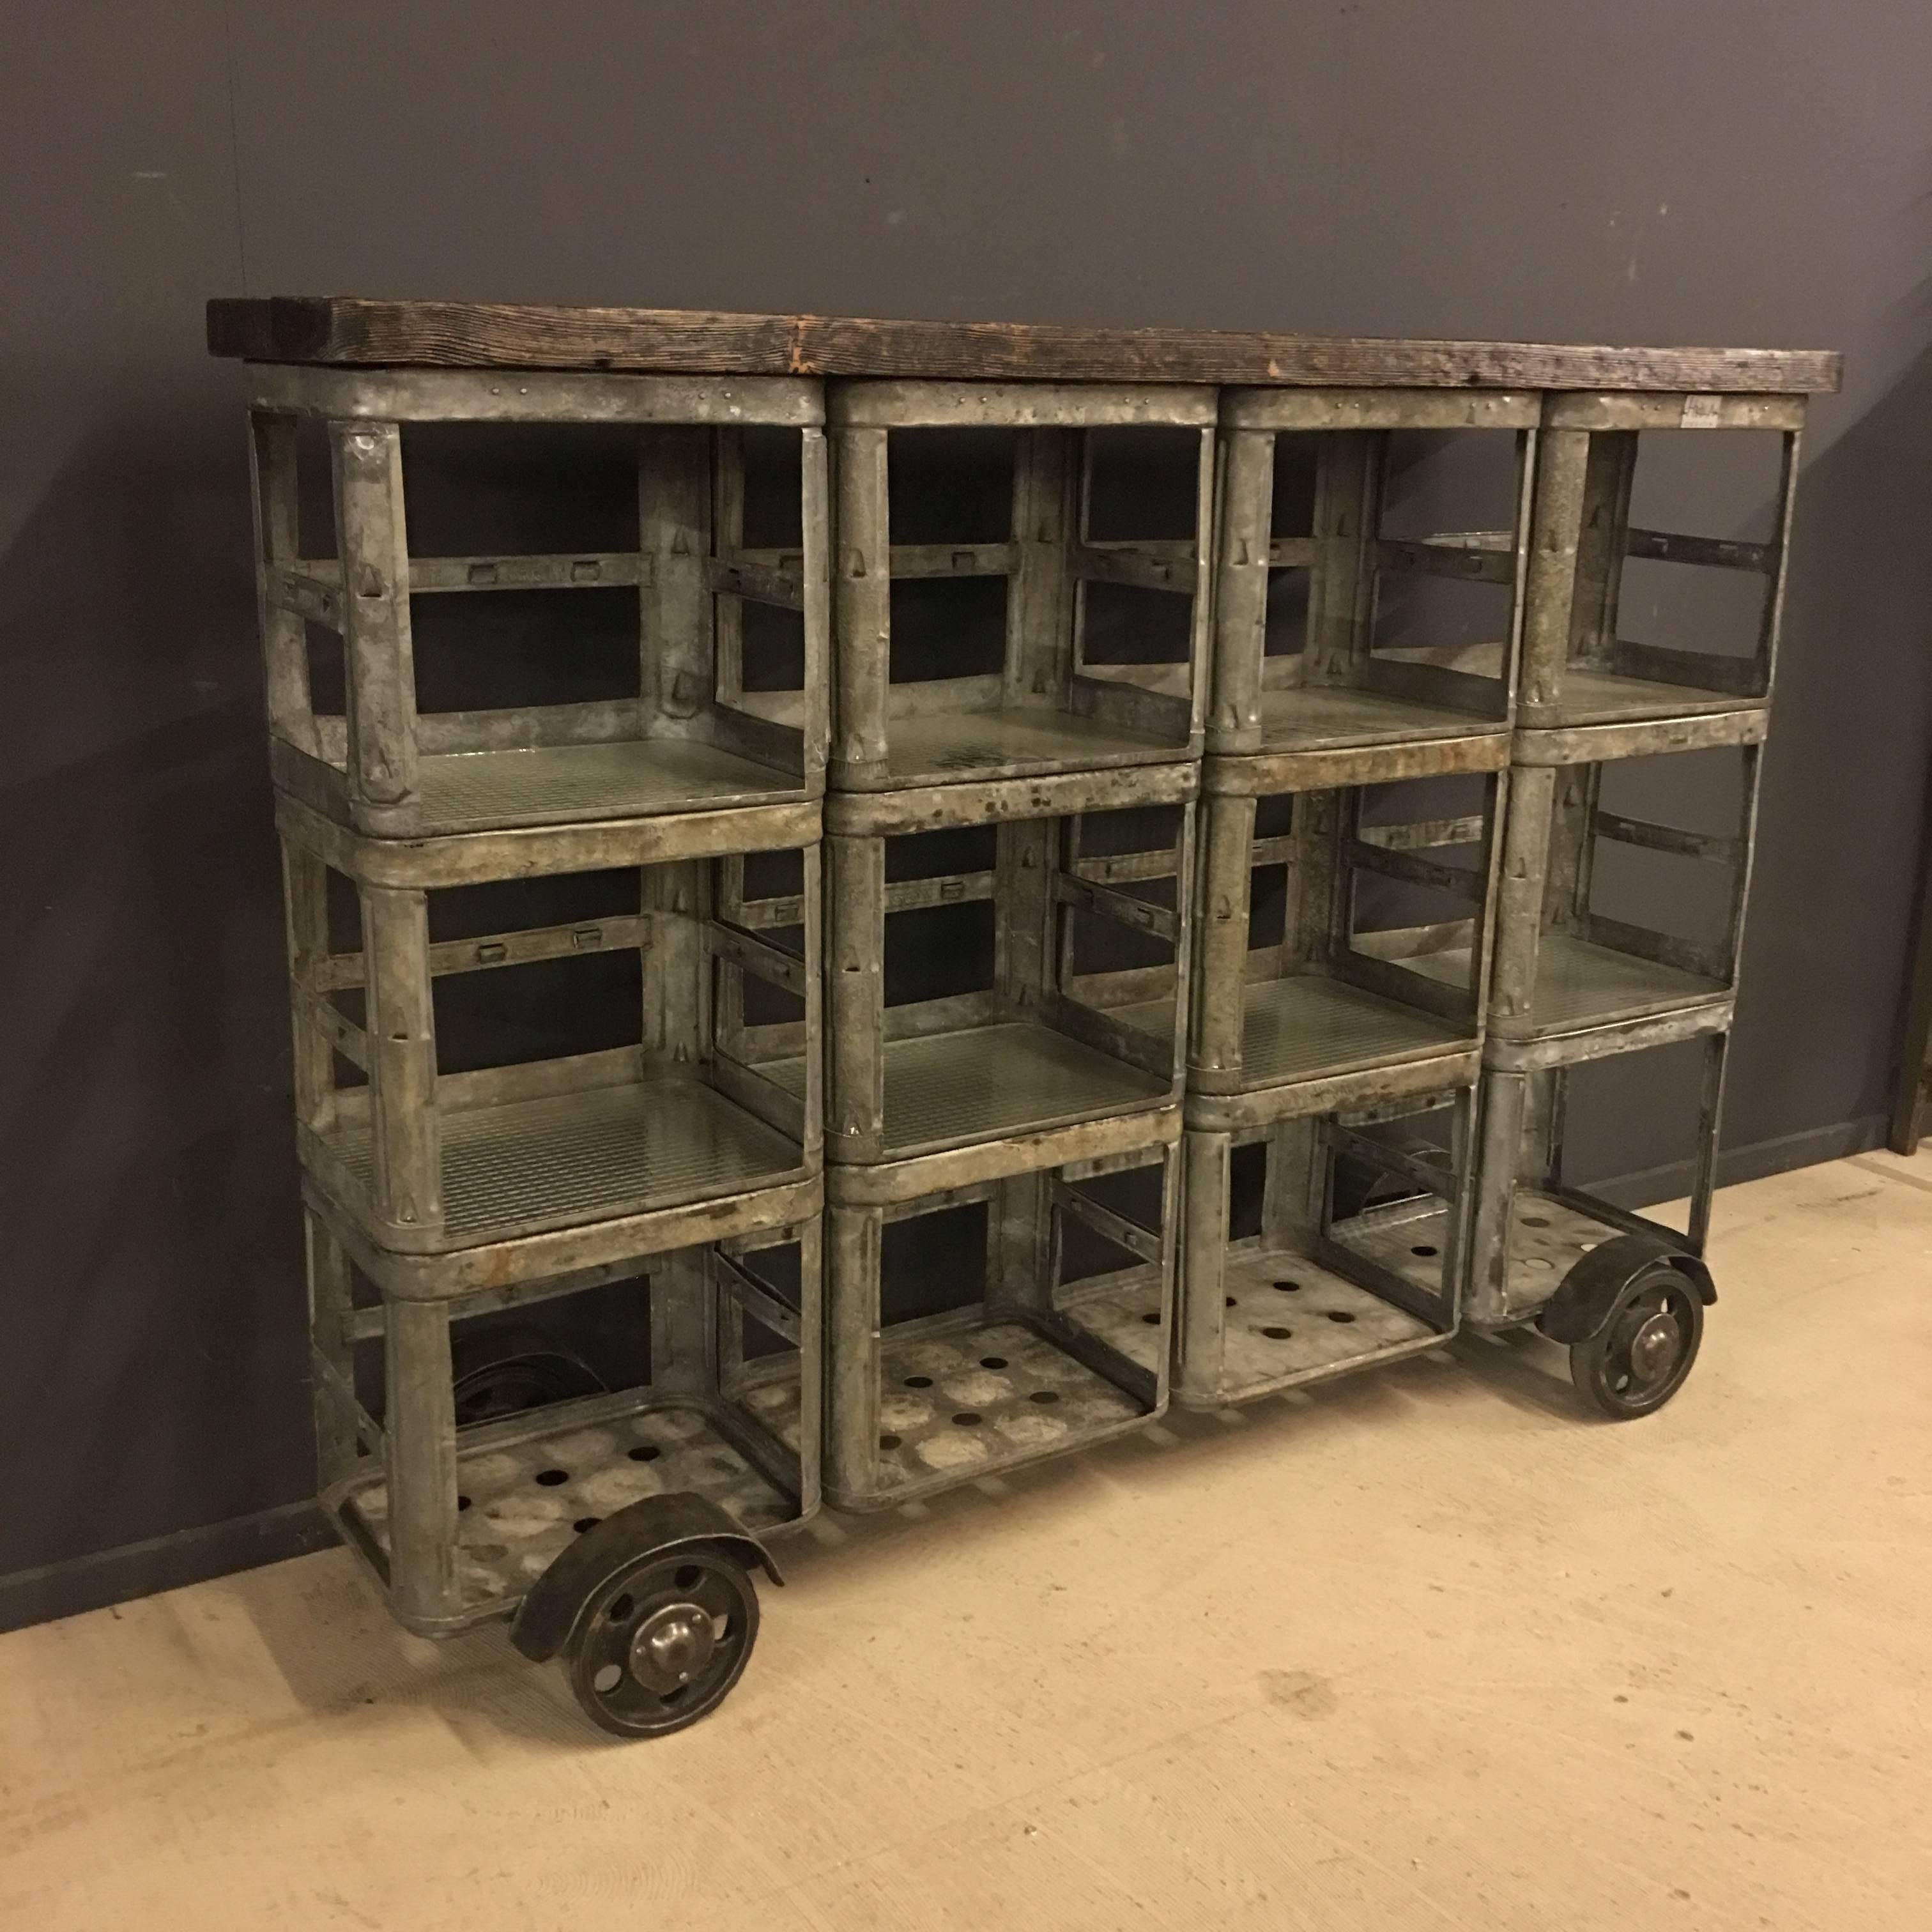 This big Industrial rack is manufactured by HRDLA Design. Made of vintage zinc soda crates used in the 1950s, cast iron wheels and wired glass used as shelves.